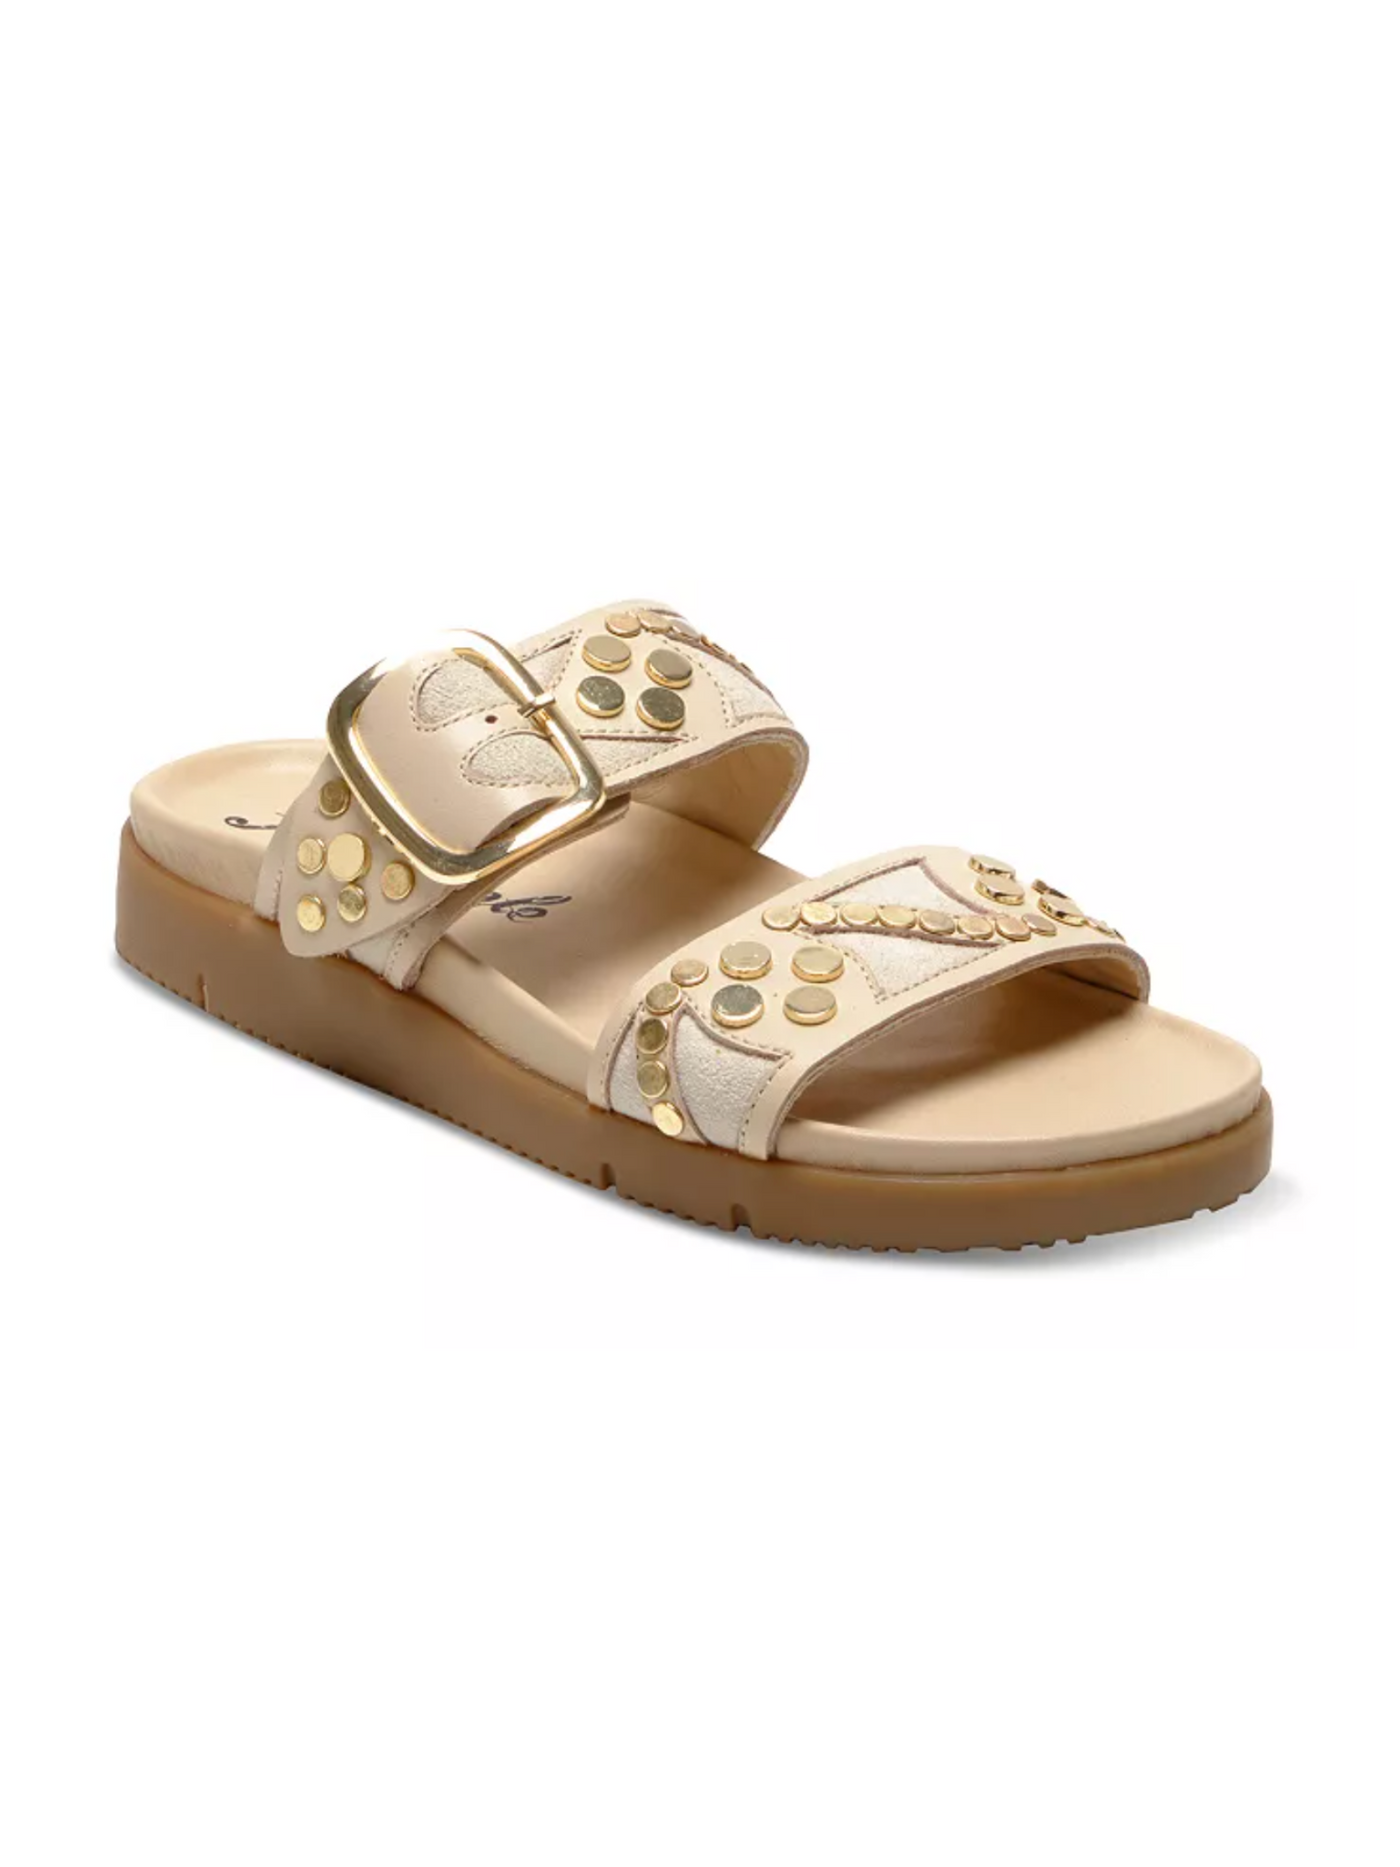 Free People Revelry Studded Sandals